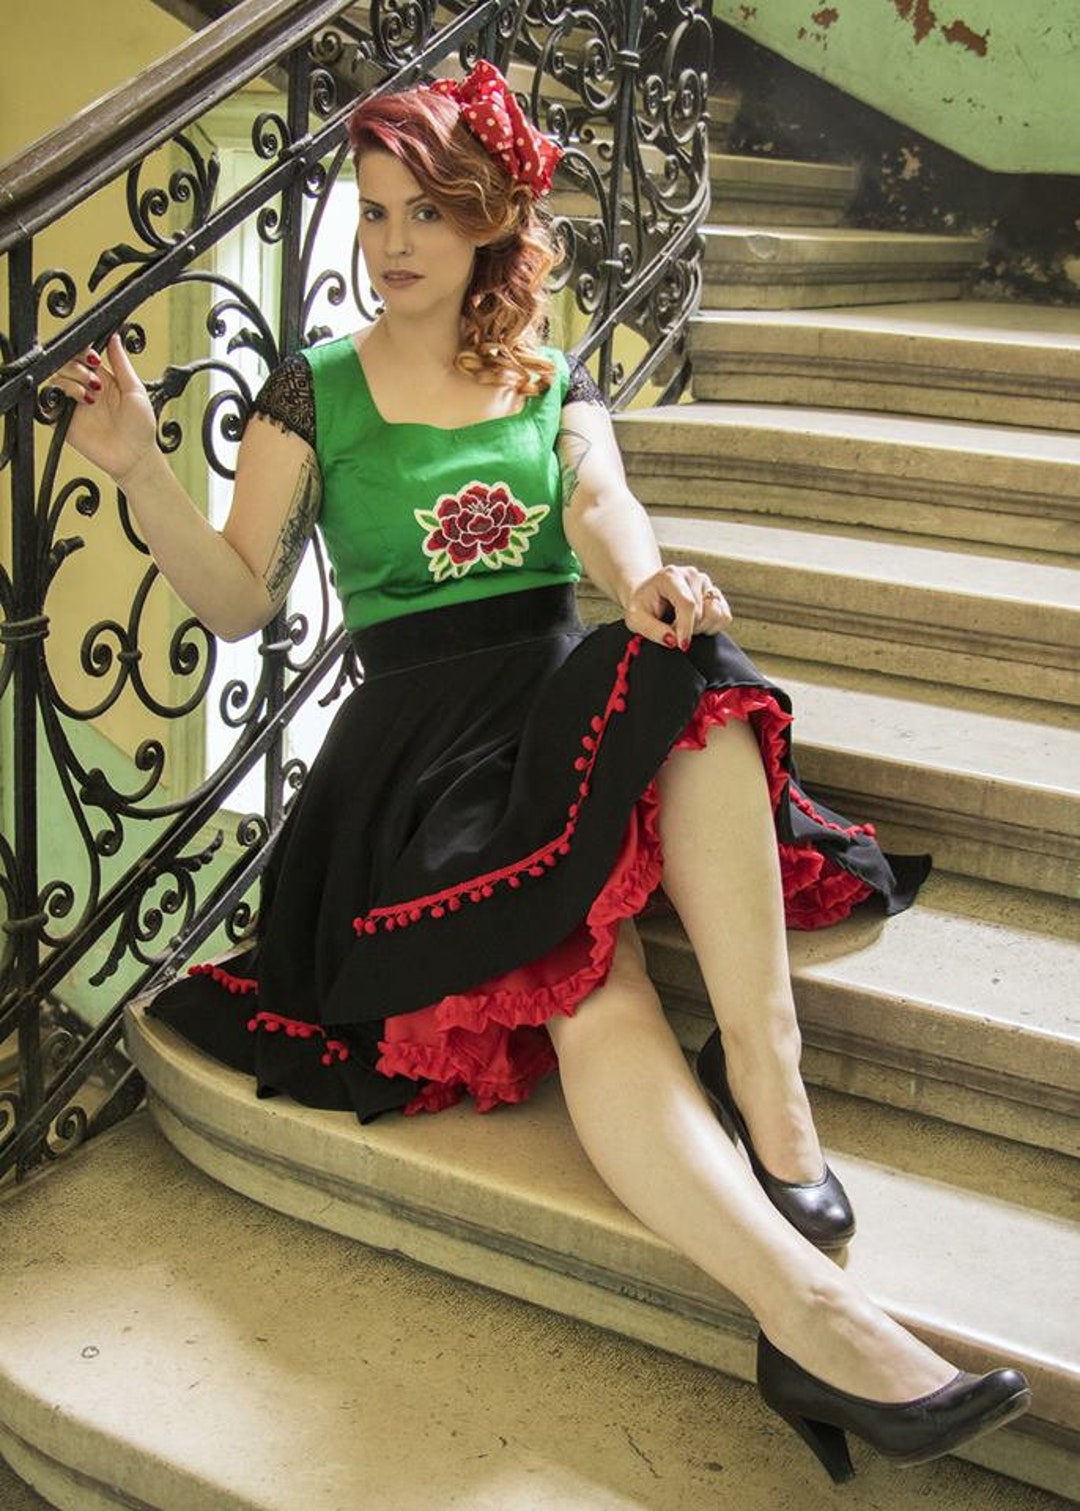 Maria Dress: Vintage Style / Pin-up / Rockabilly / Mexican Style Dress by Ticci  Rockabilly Clothing -  Canada